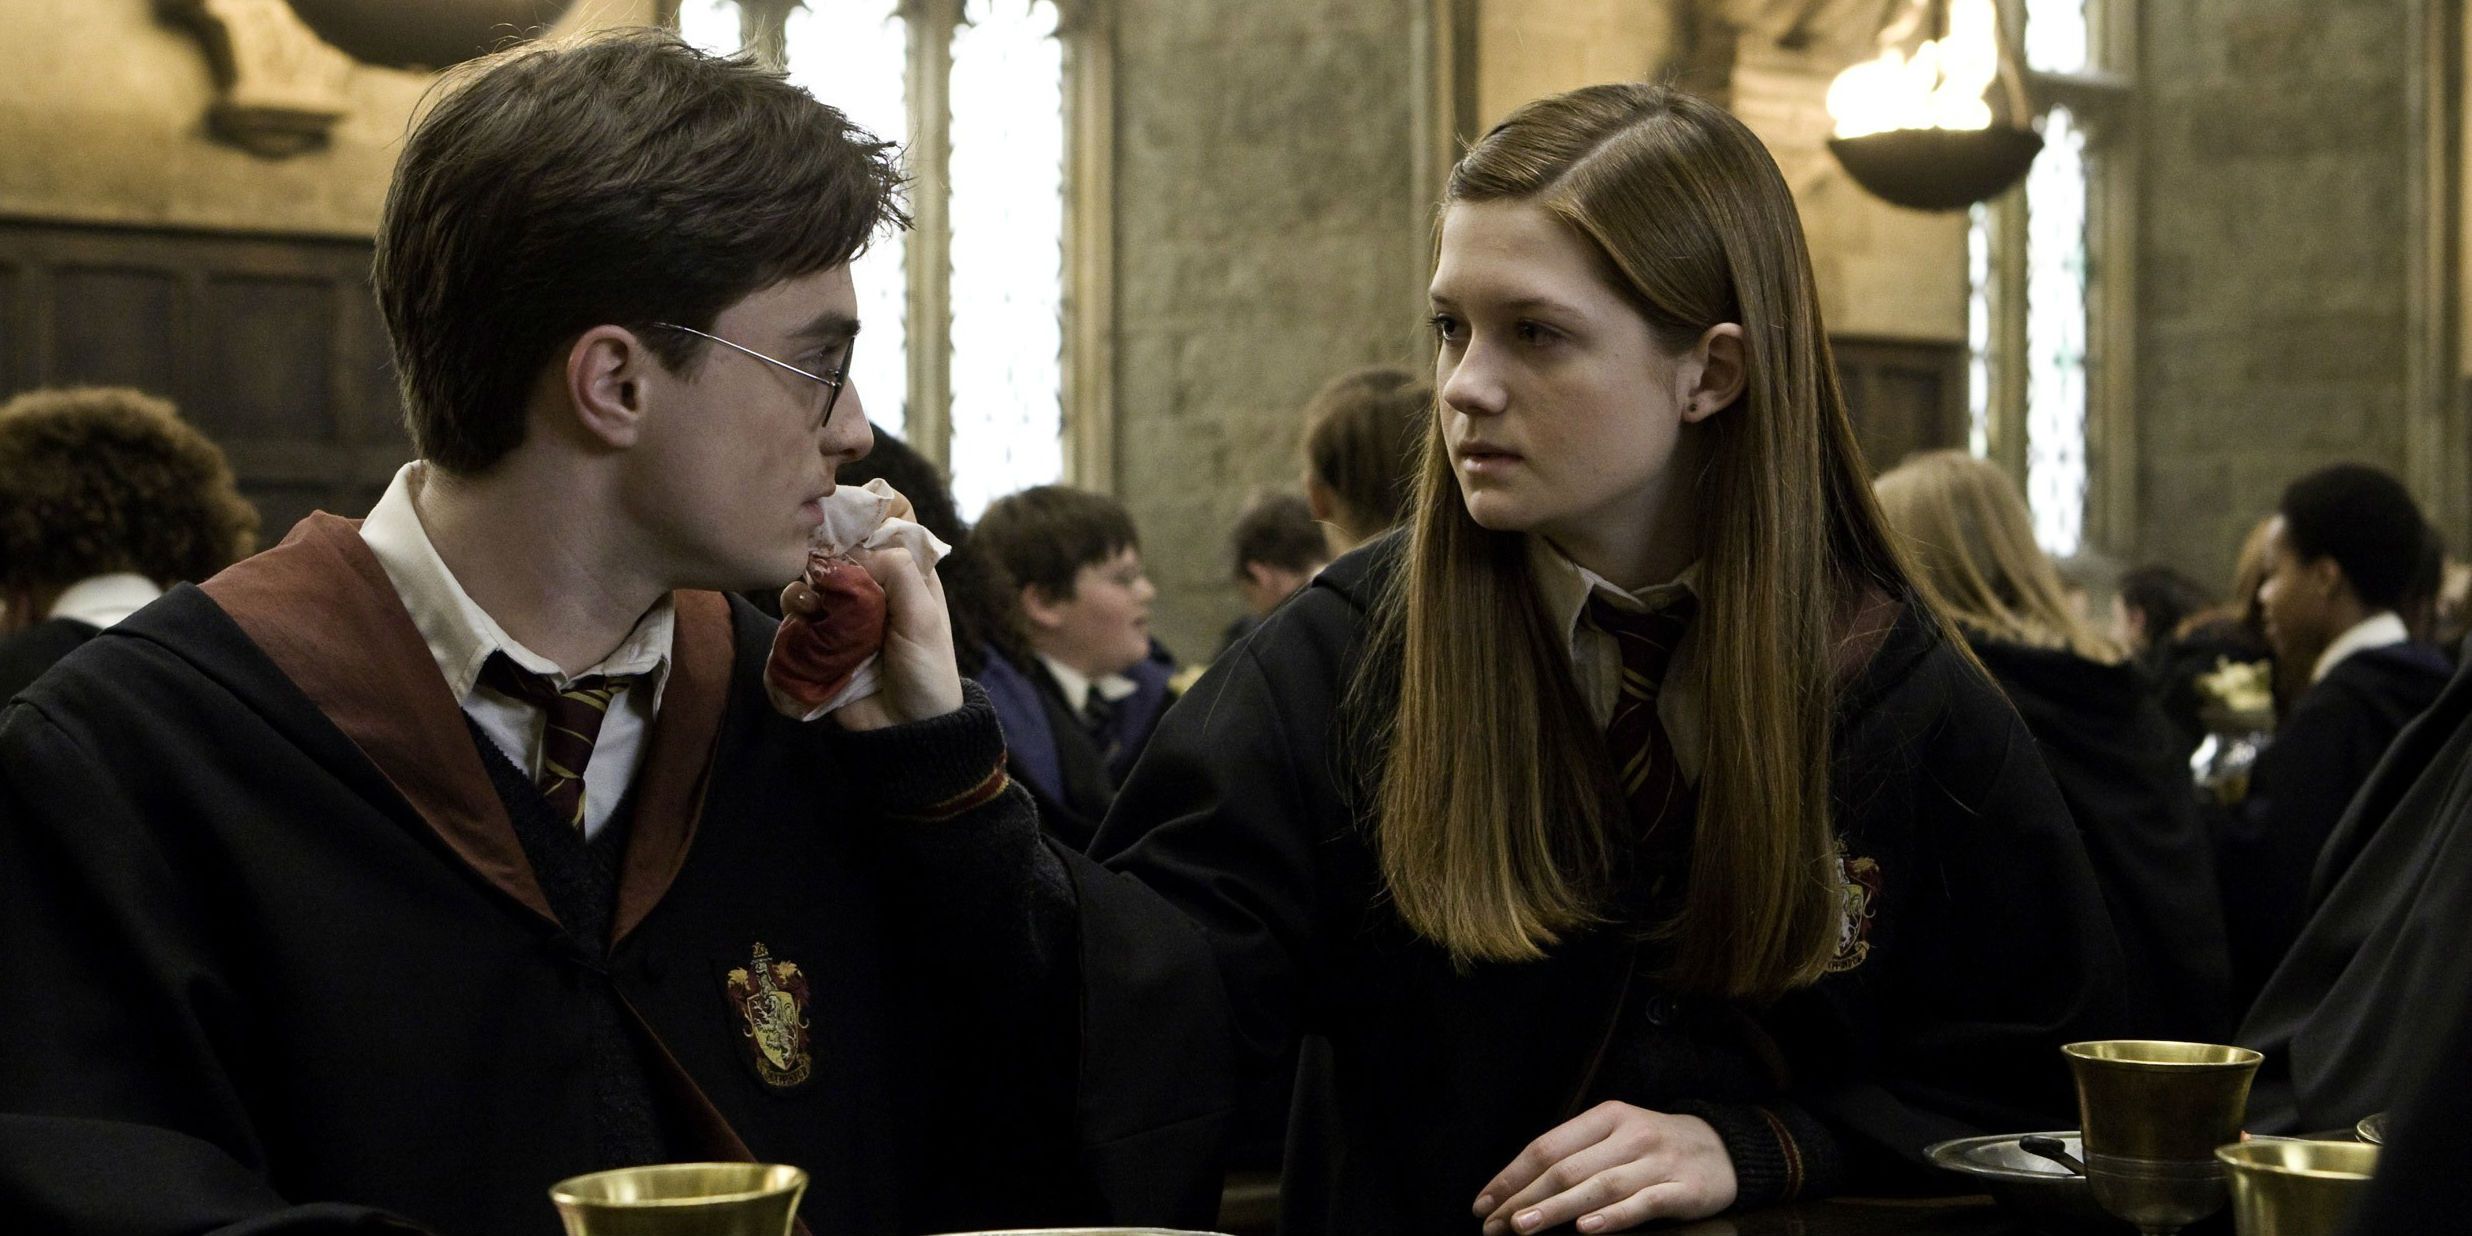 Harry Potter 16 Moments From The Books You Never Got To See In The Movies